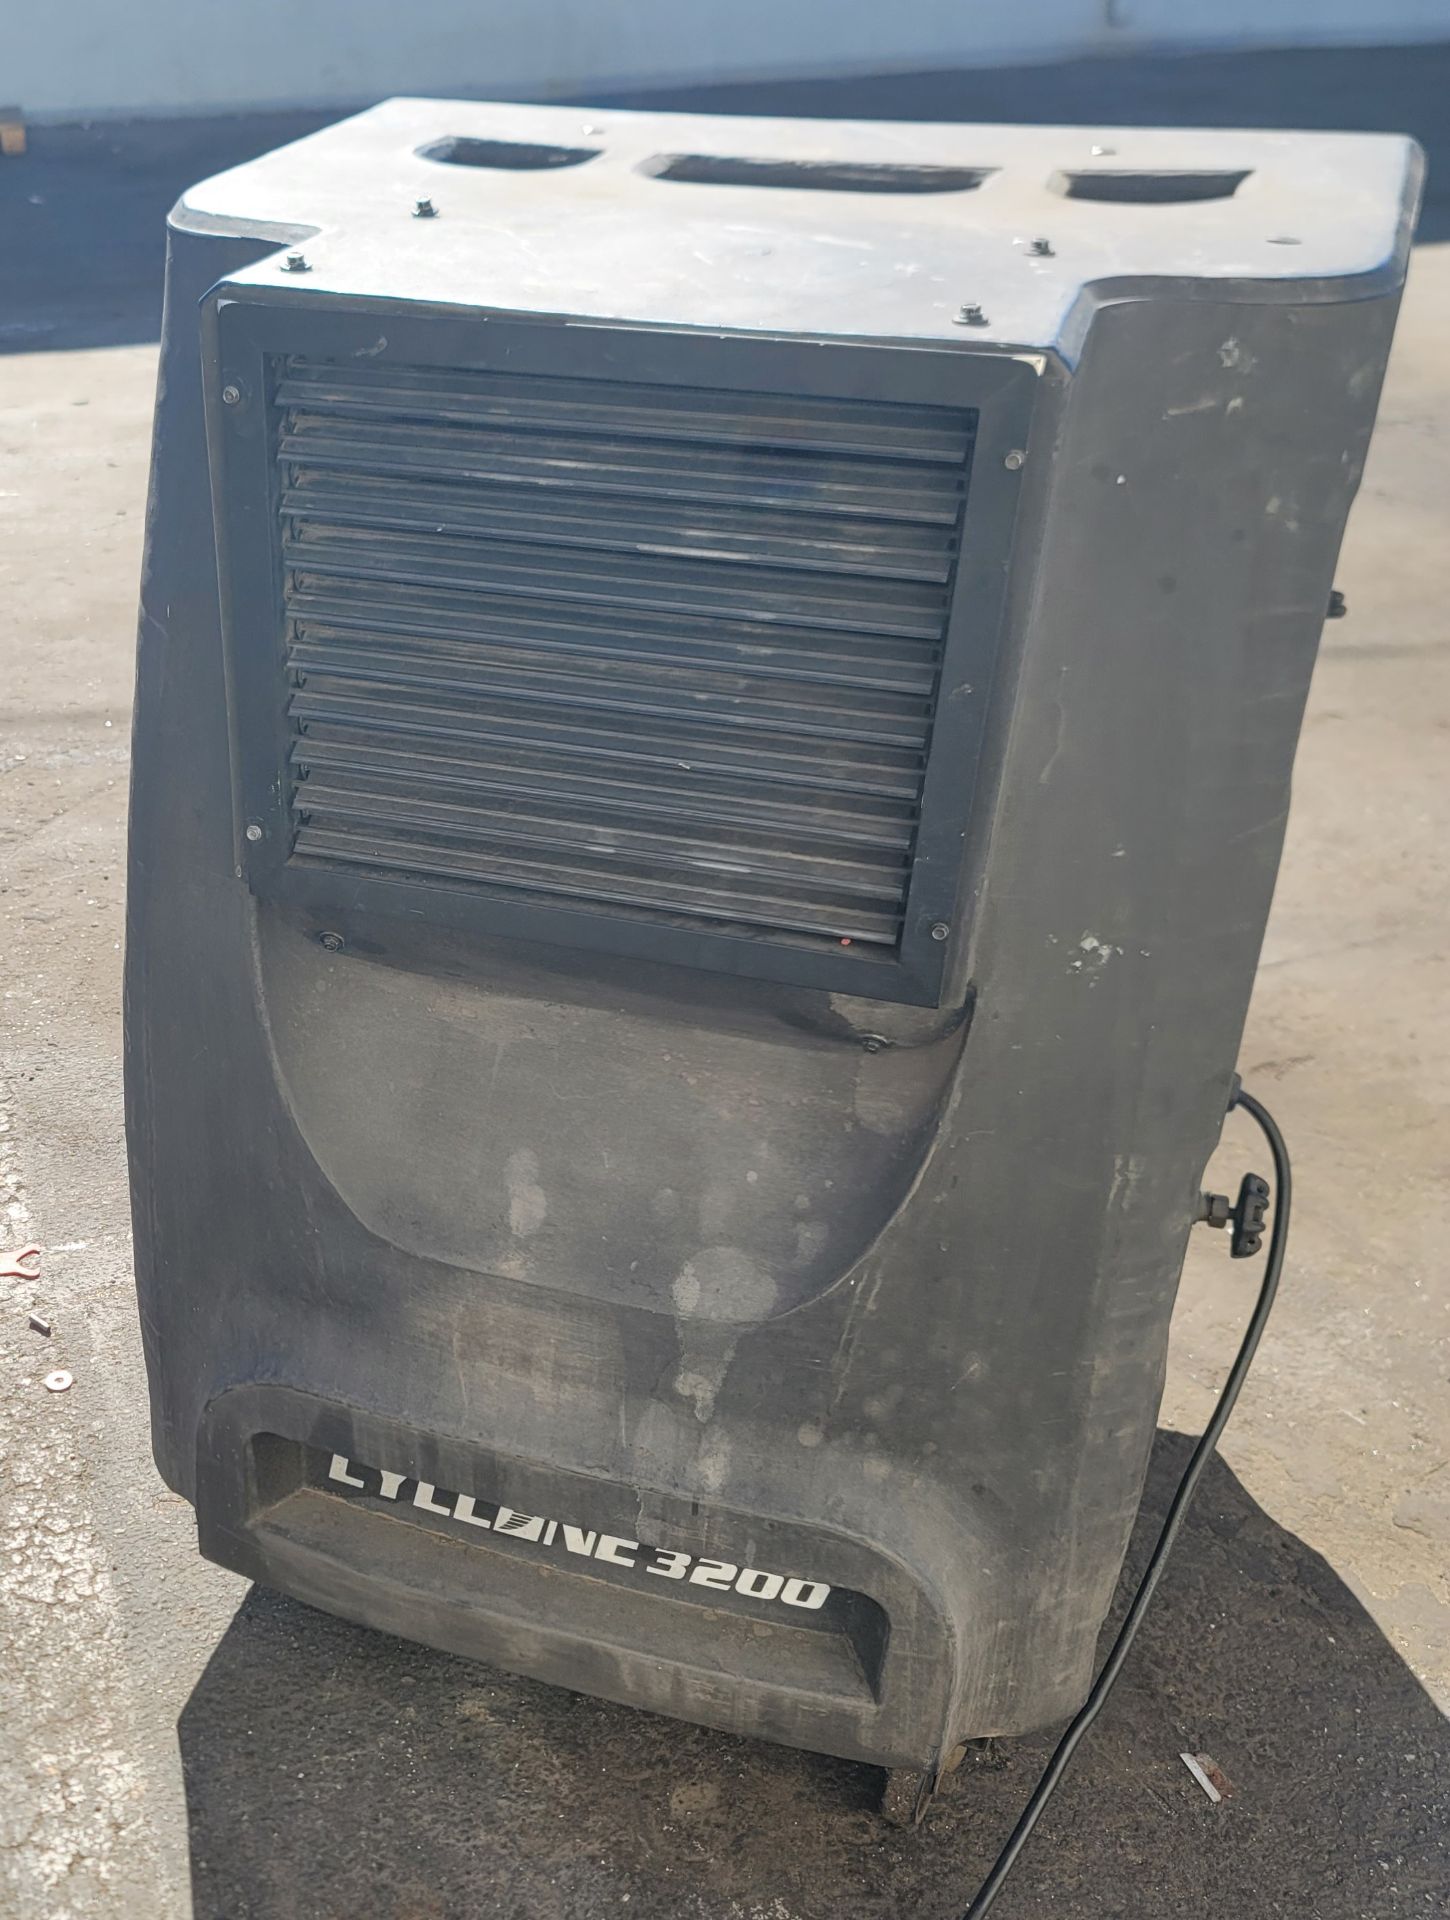 PORT-A-COOL CYCLONE 3200 PORTABLE EVAPORATIVE COOLER, MODEL PACCYC04, S/N 354648-13 - Image 2 of 4